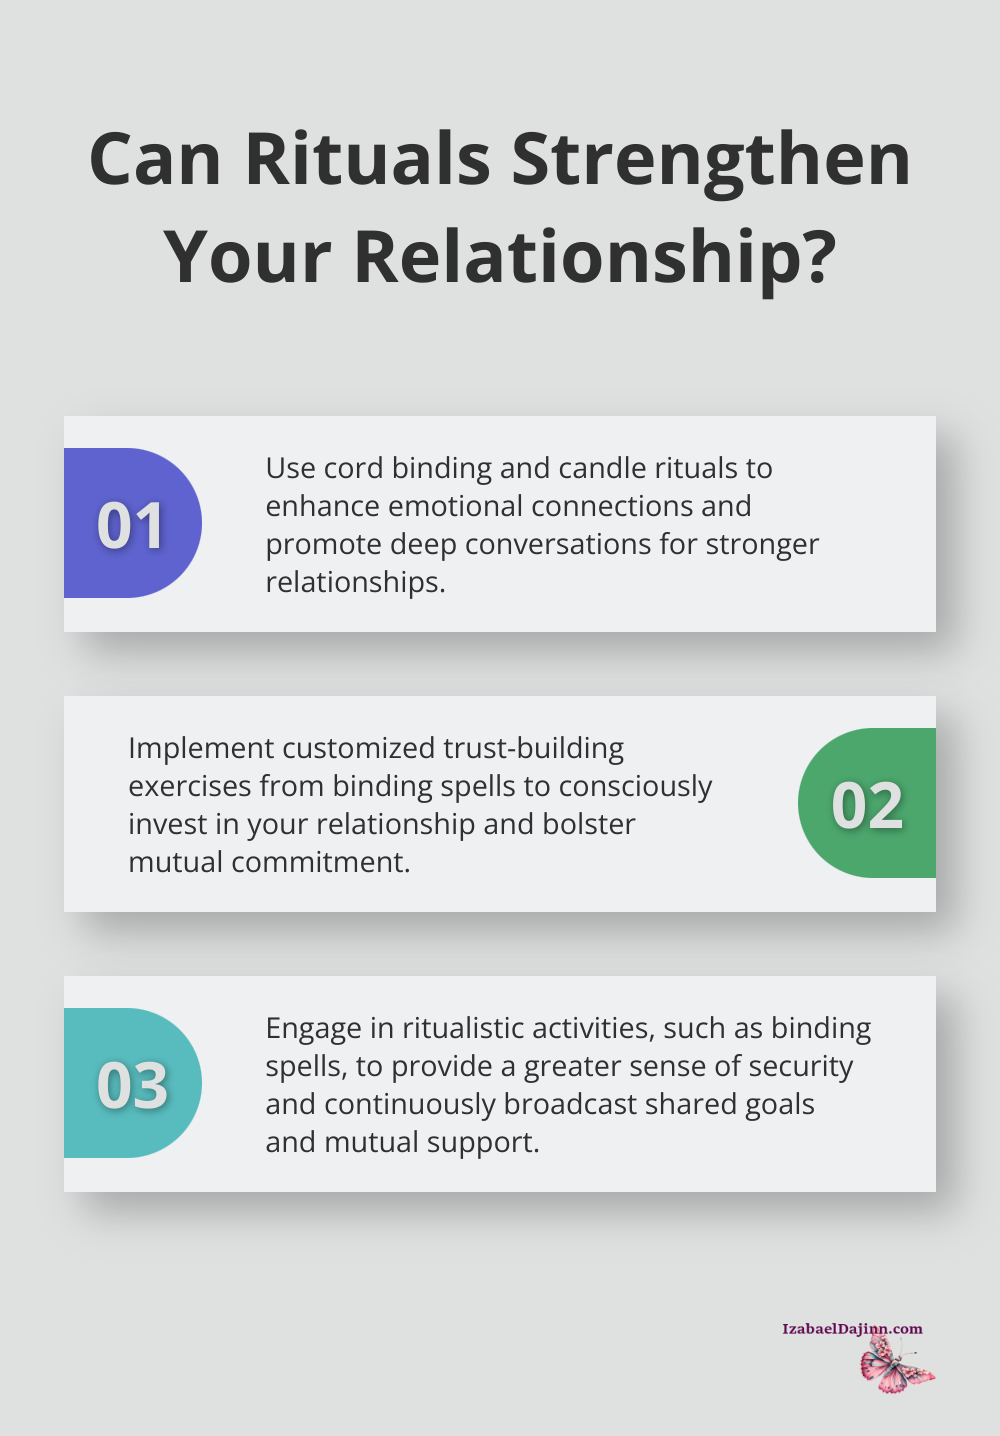 Fact - Can Rituals Strengthen Your Relationship?